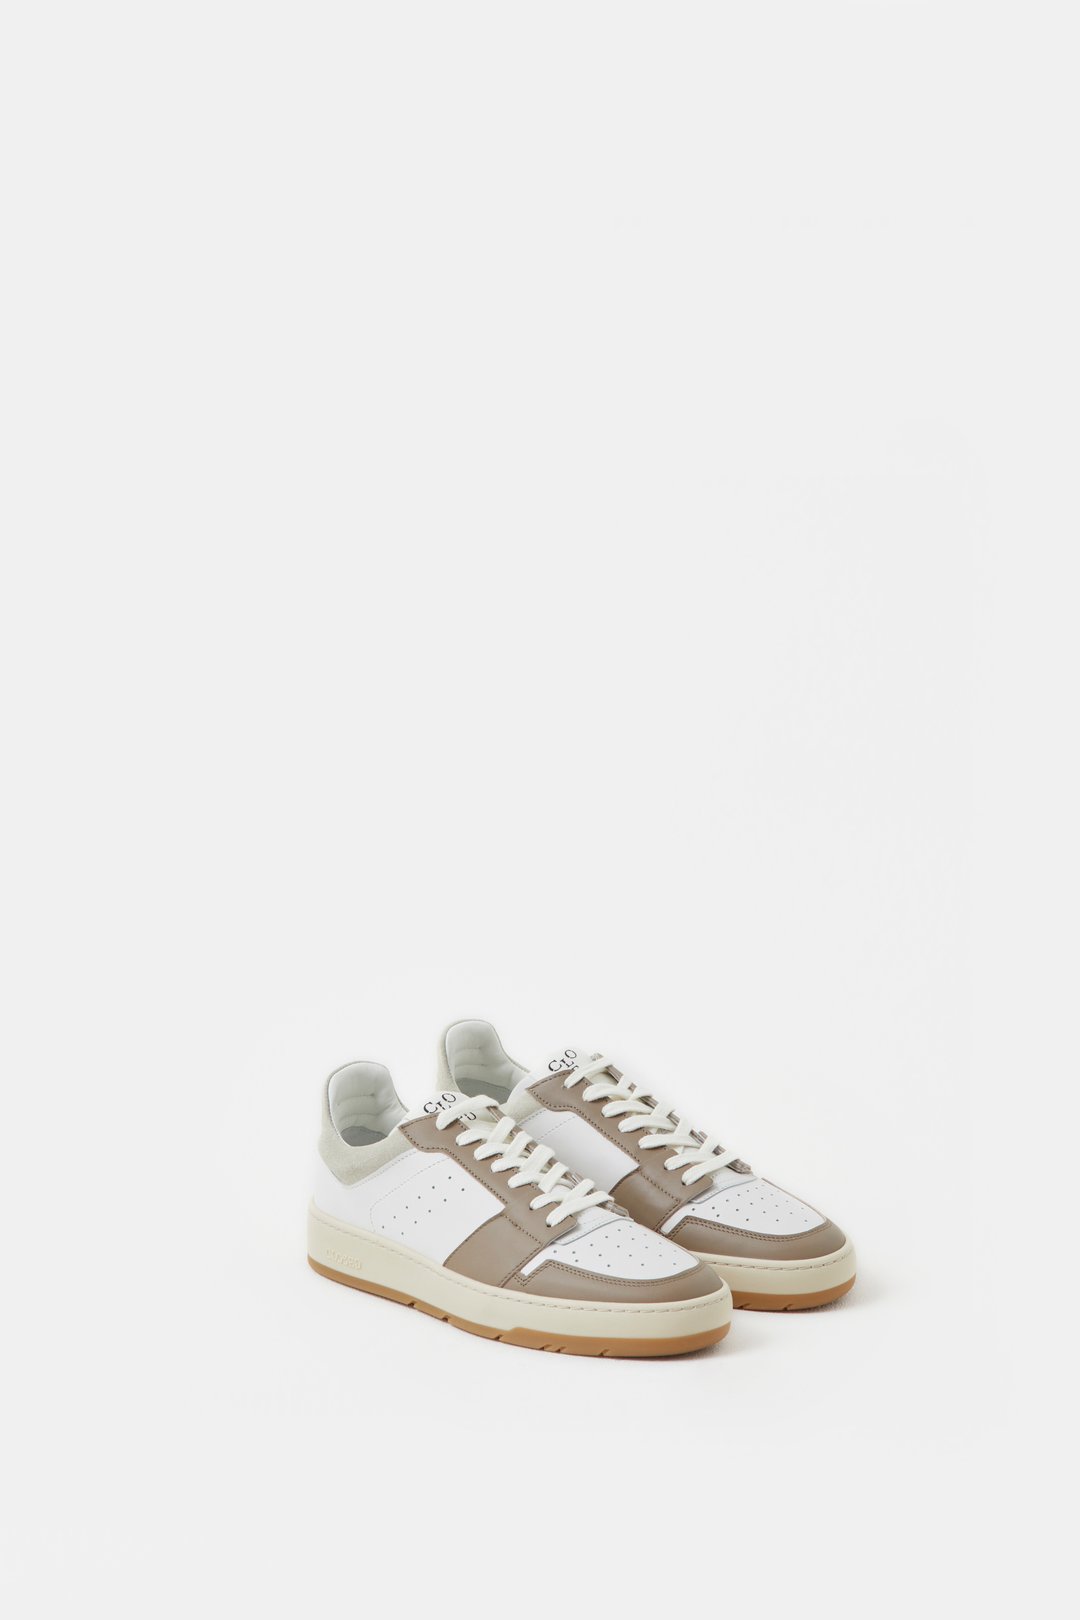 CLOSED WOMENS LOW TOP SNEAKER - TAUPE BEIGE